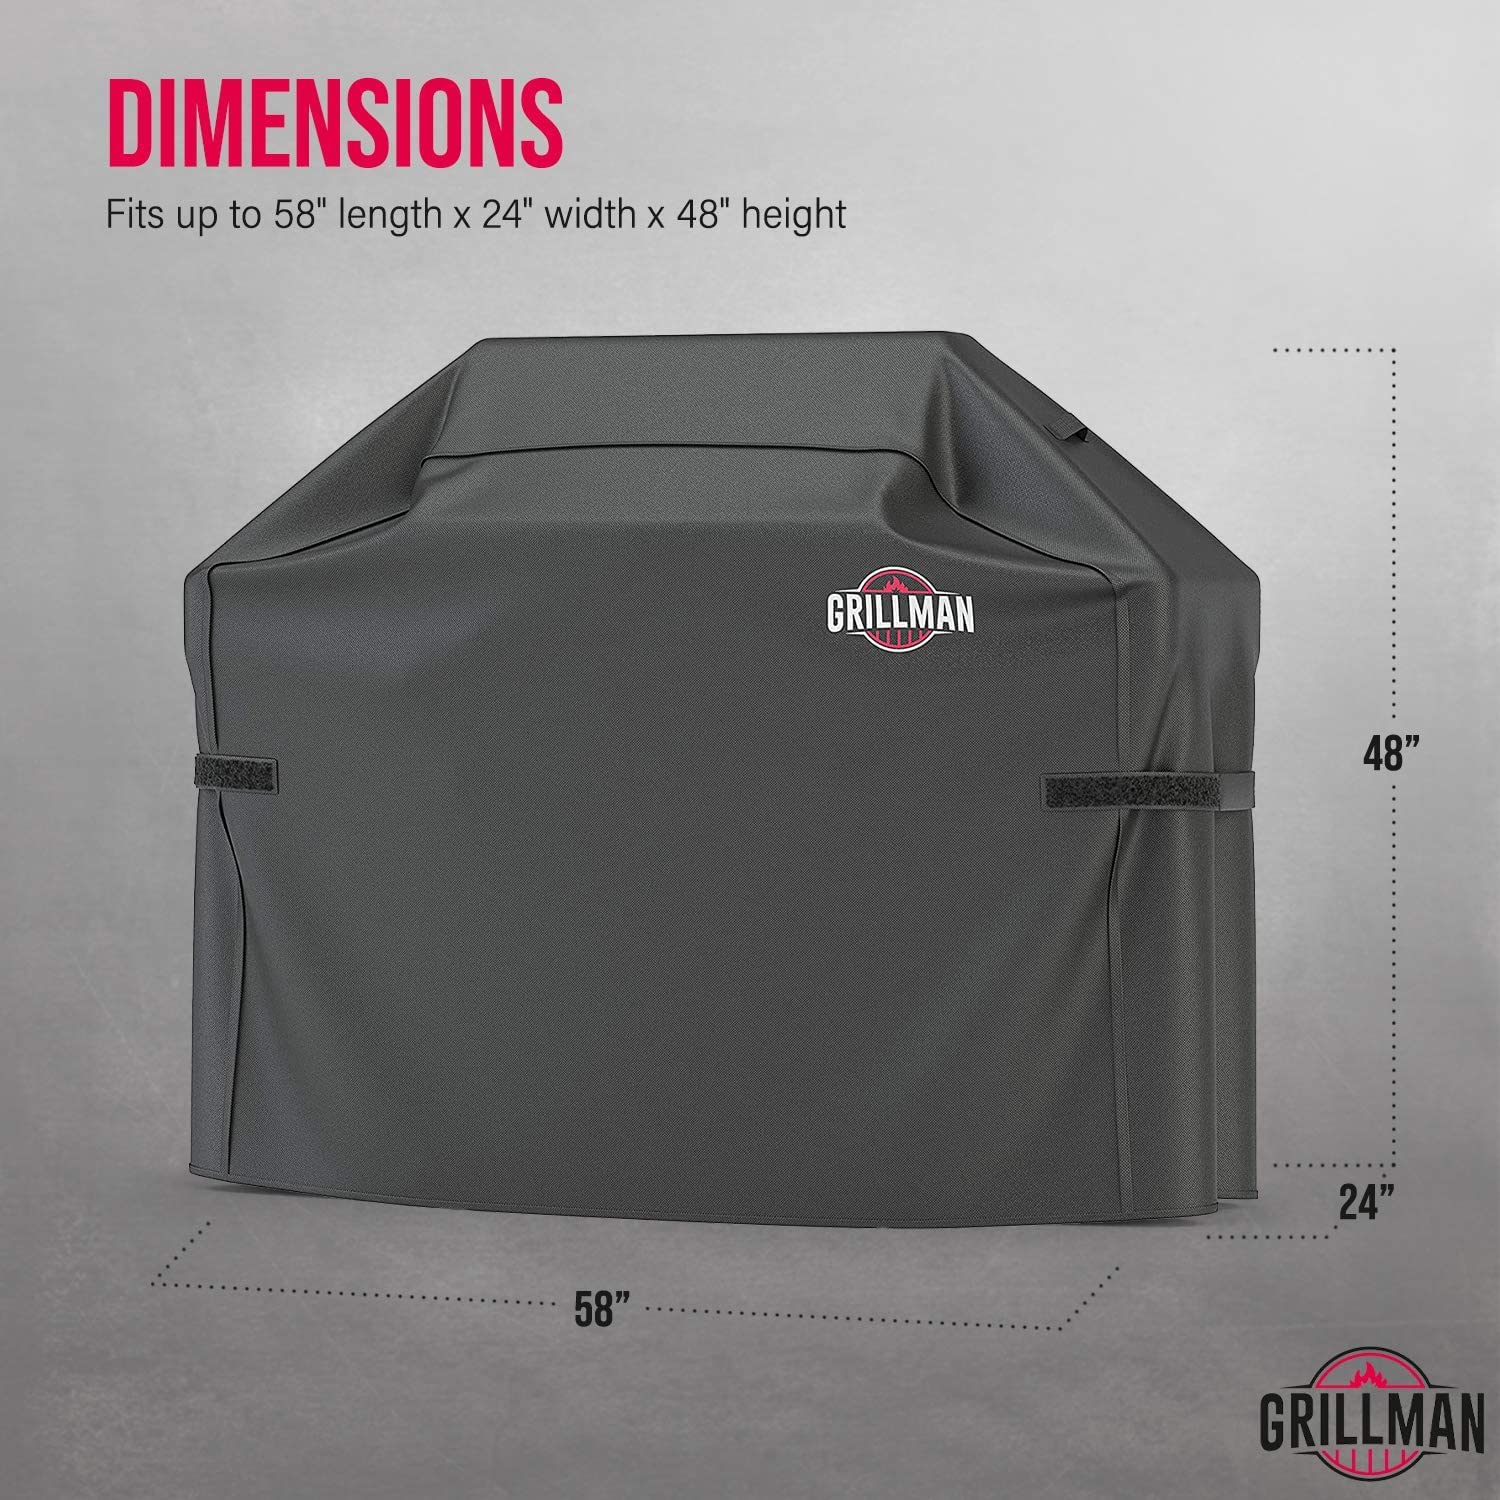 Grillman Premium BBQ Grill Cover Heavy-Duty Gas Grill Cover for Weber Brinkmann Char Broil etc. Rip-Proof UV & Water-Resistant. (58 L x 24 W x 48 H, Black) - image 2 of 7